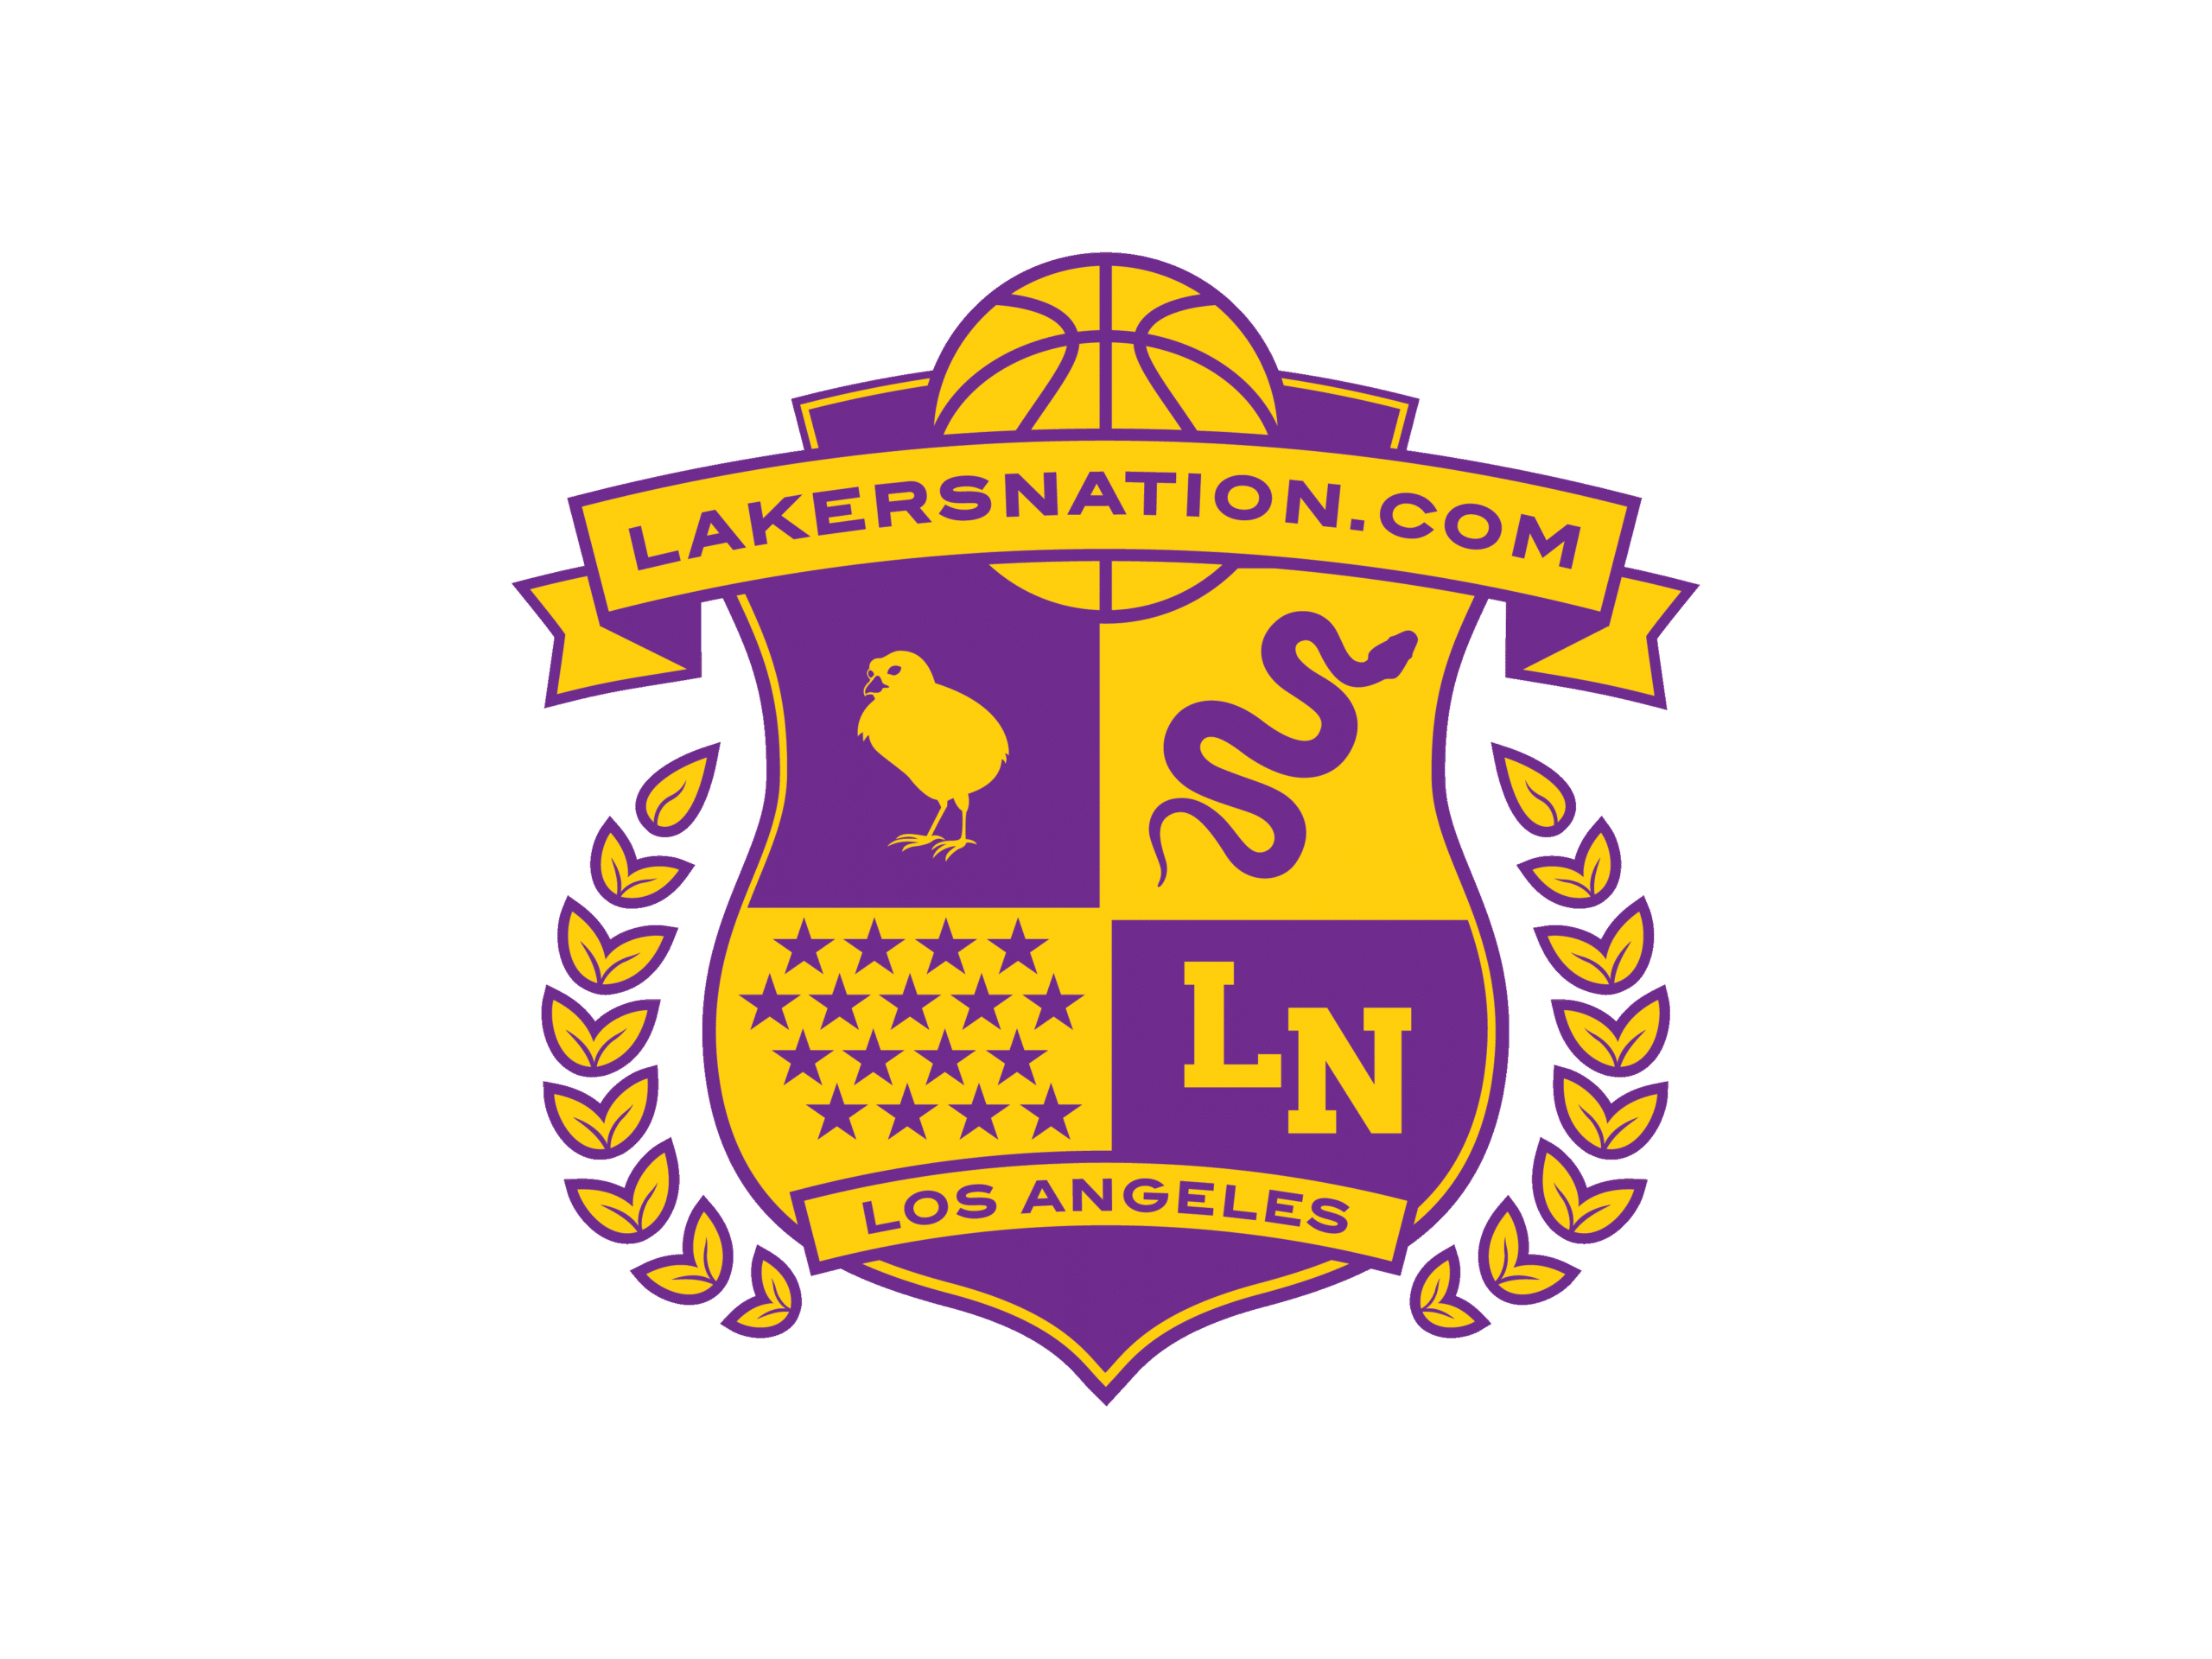 Lakers Nation Lakers News Today, Rumors, Schedule and More